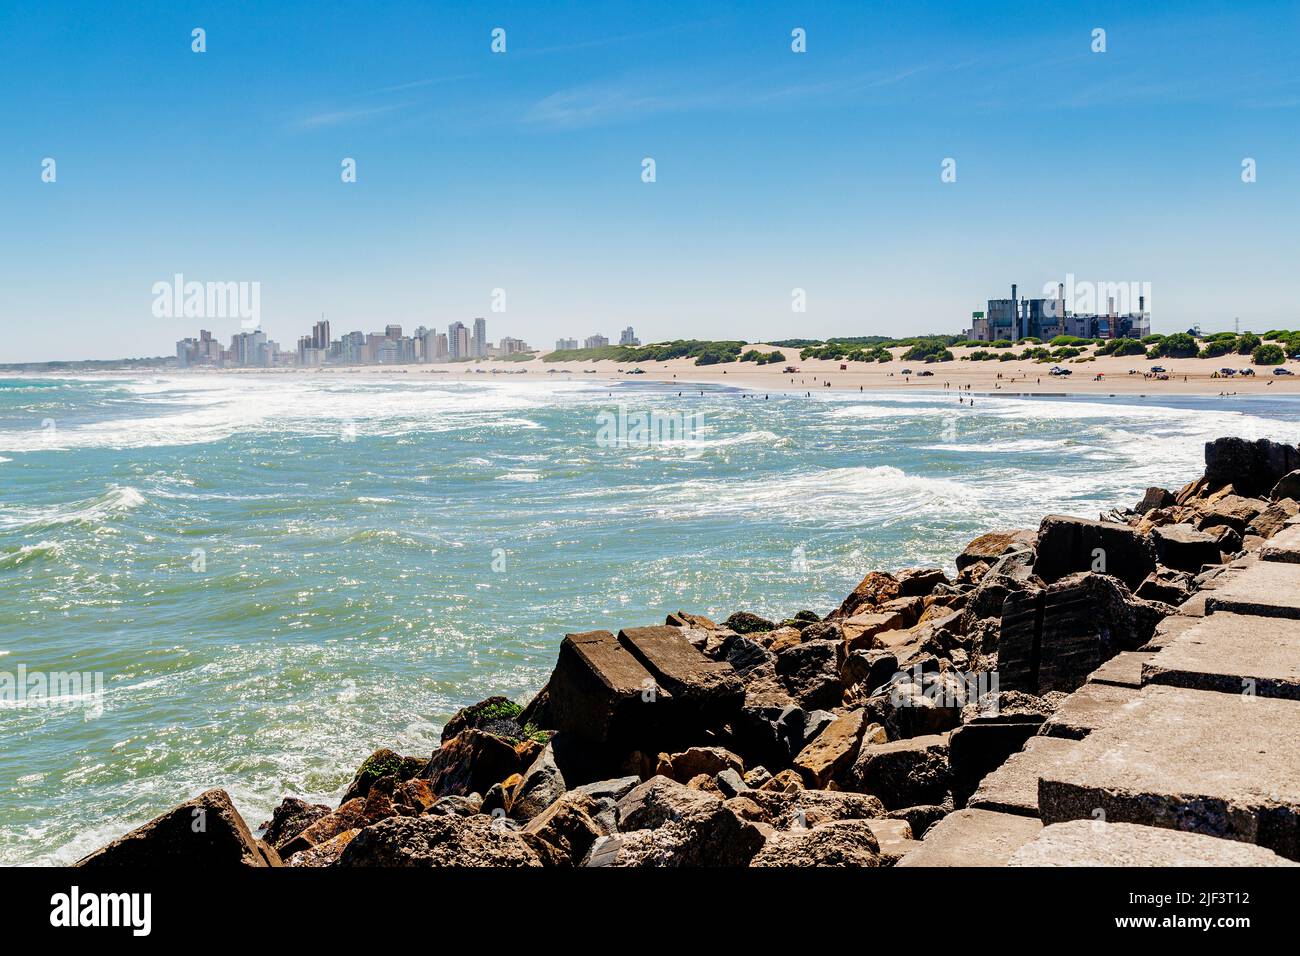 Necochea city, Buenos Aires, Argentina. Skyline view of the town and the beach from the harbor pier. Stock Photo